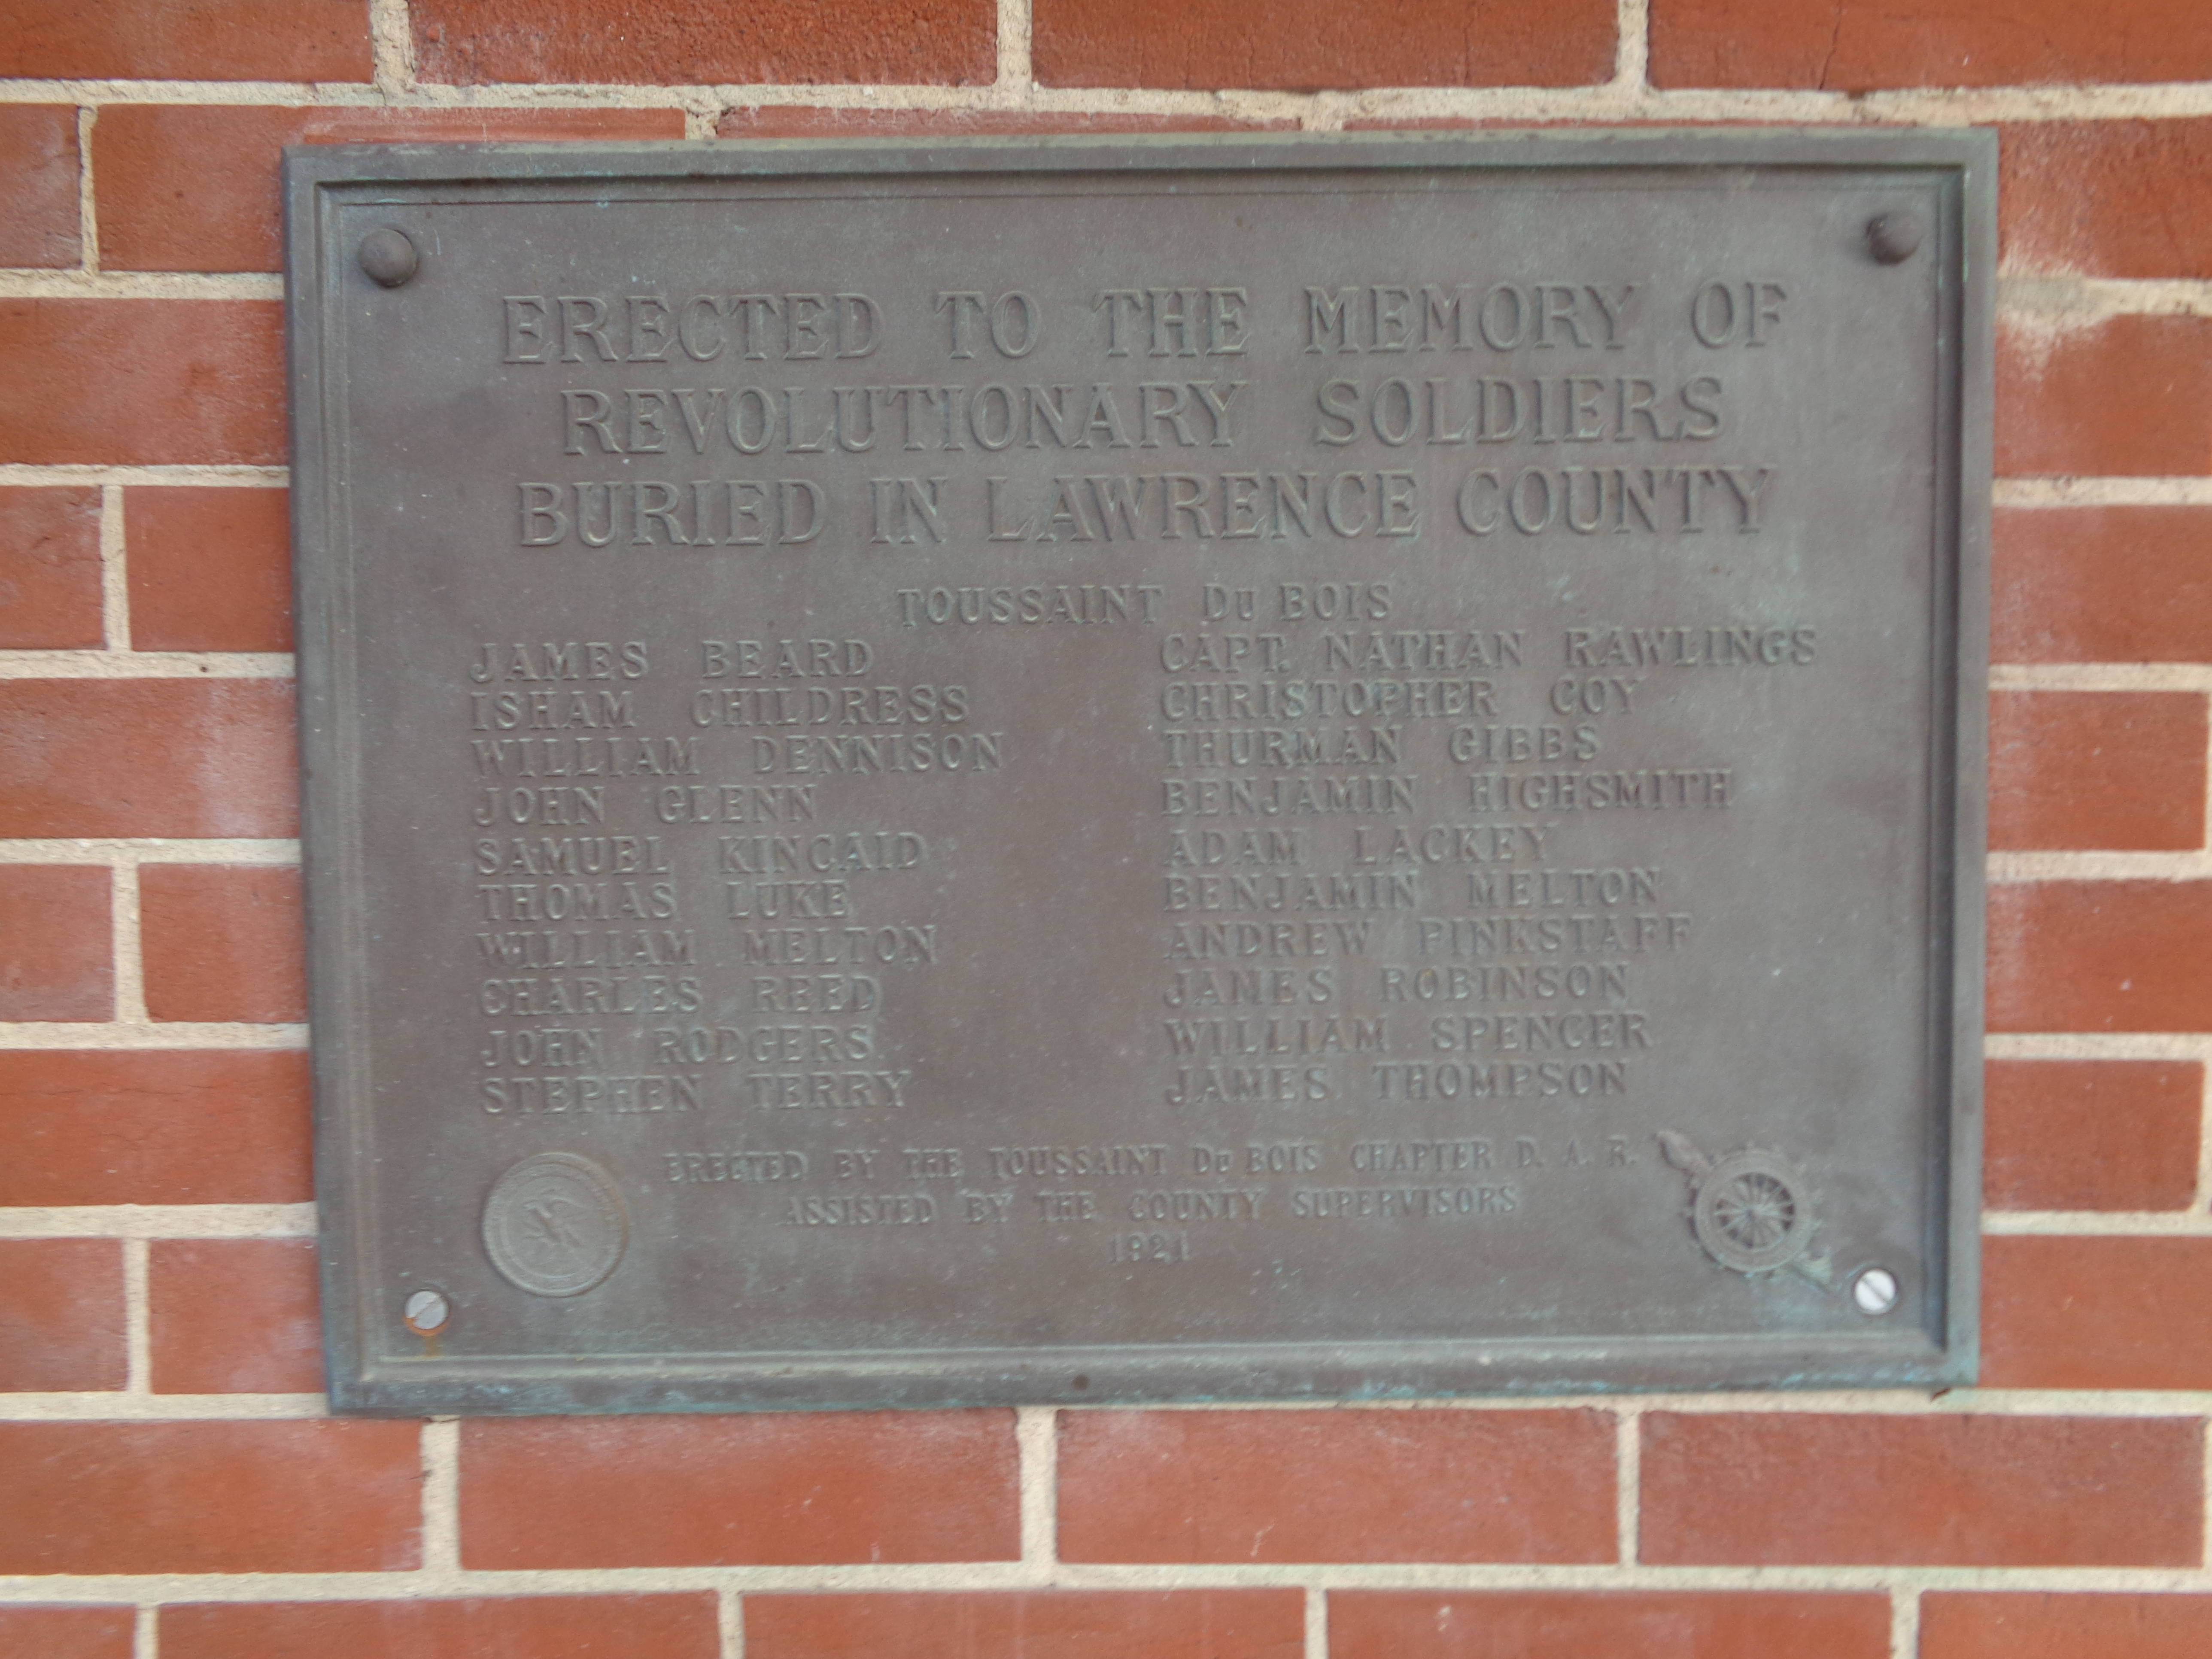 Revolutionary Soldiers Buried in Lawrence County Memorial